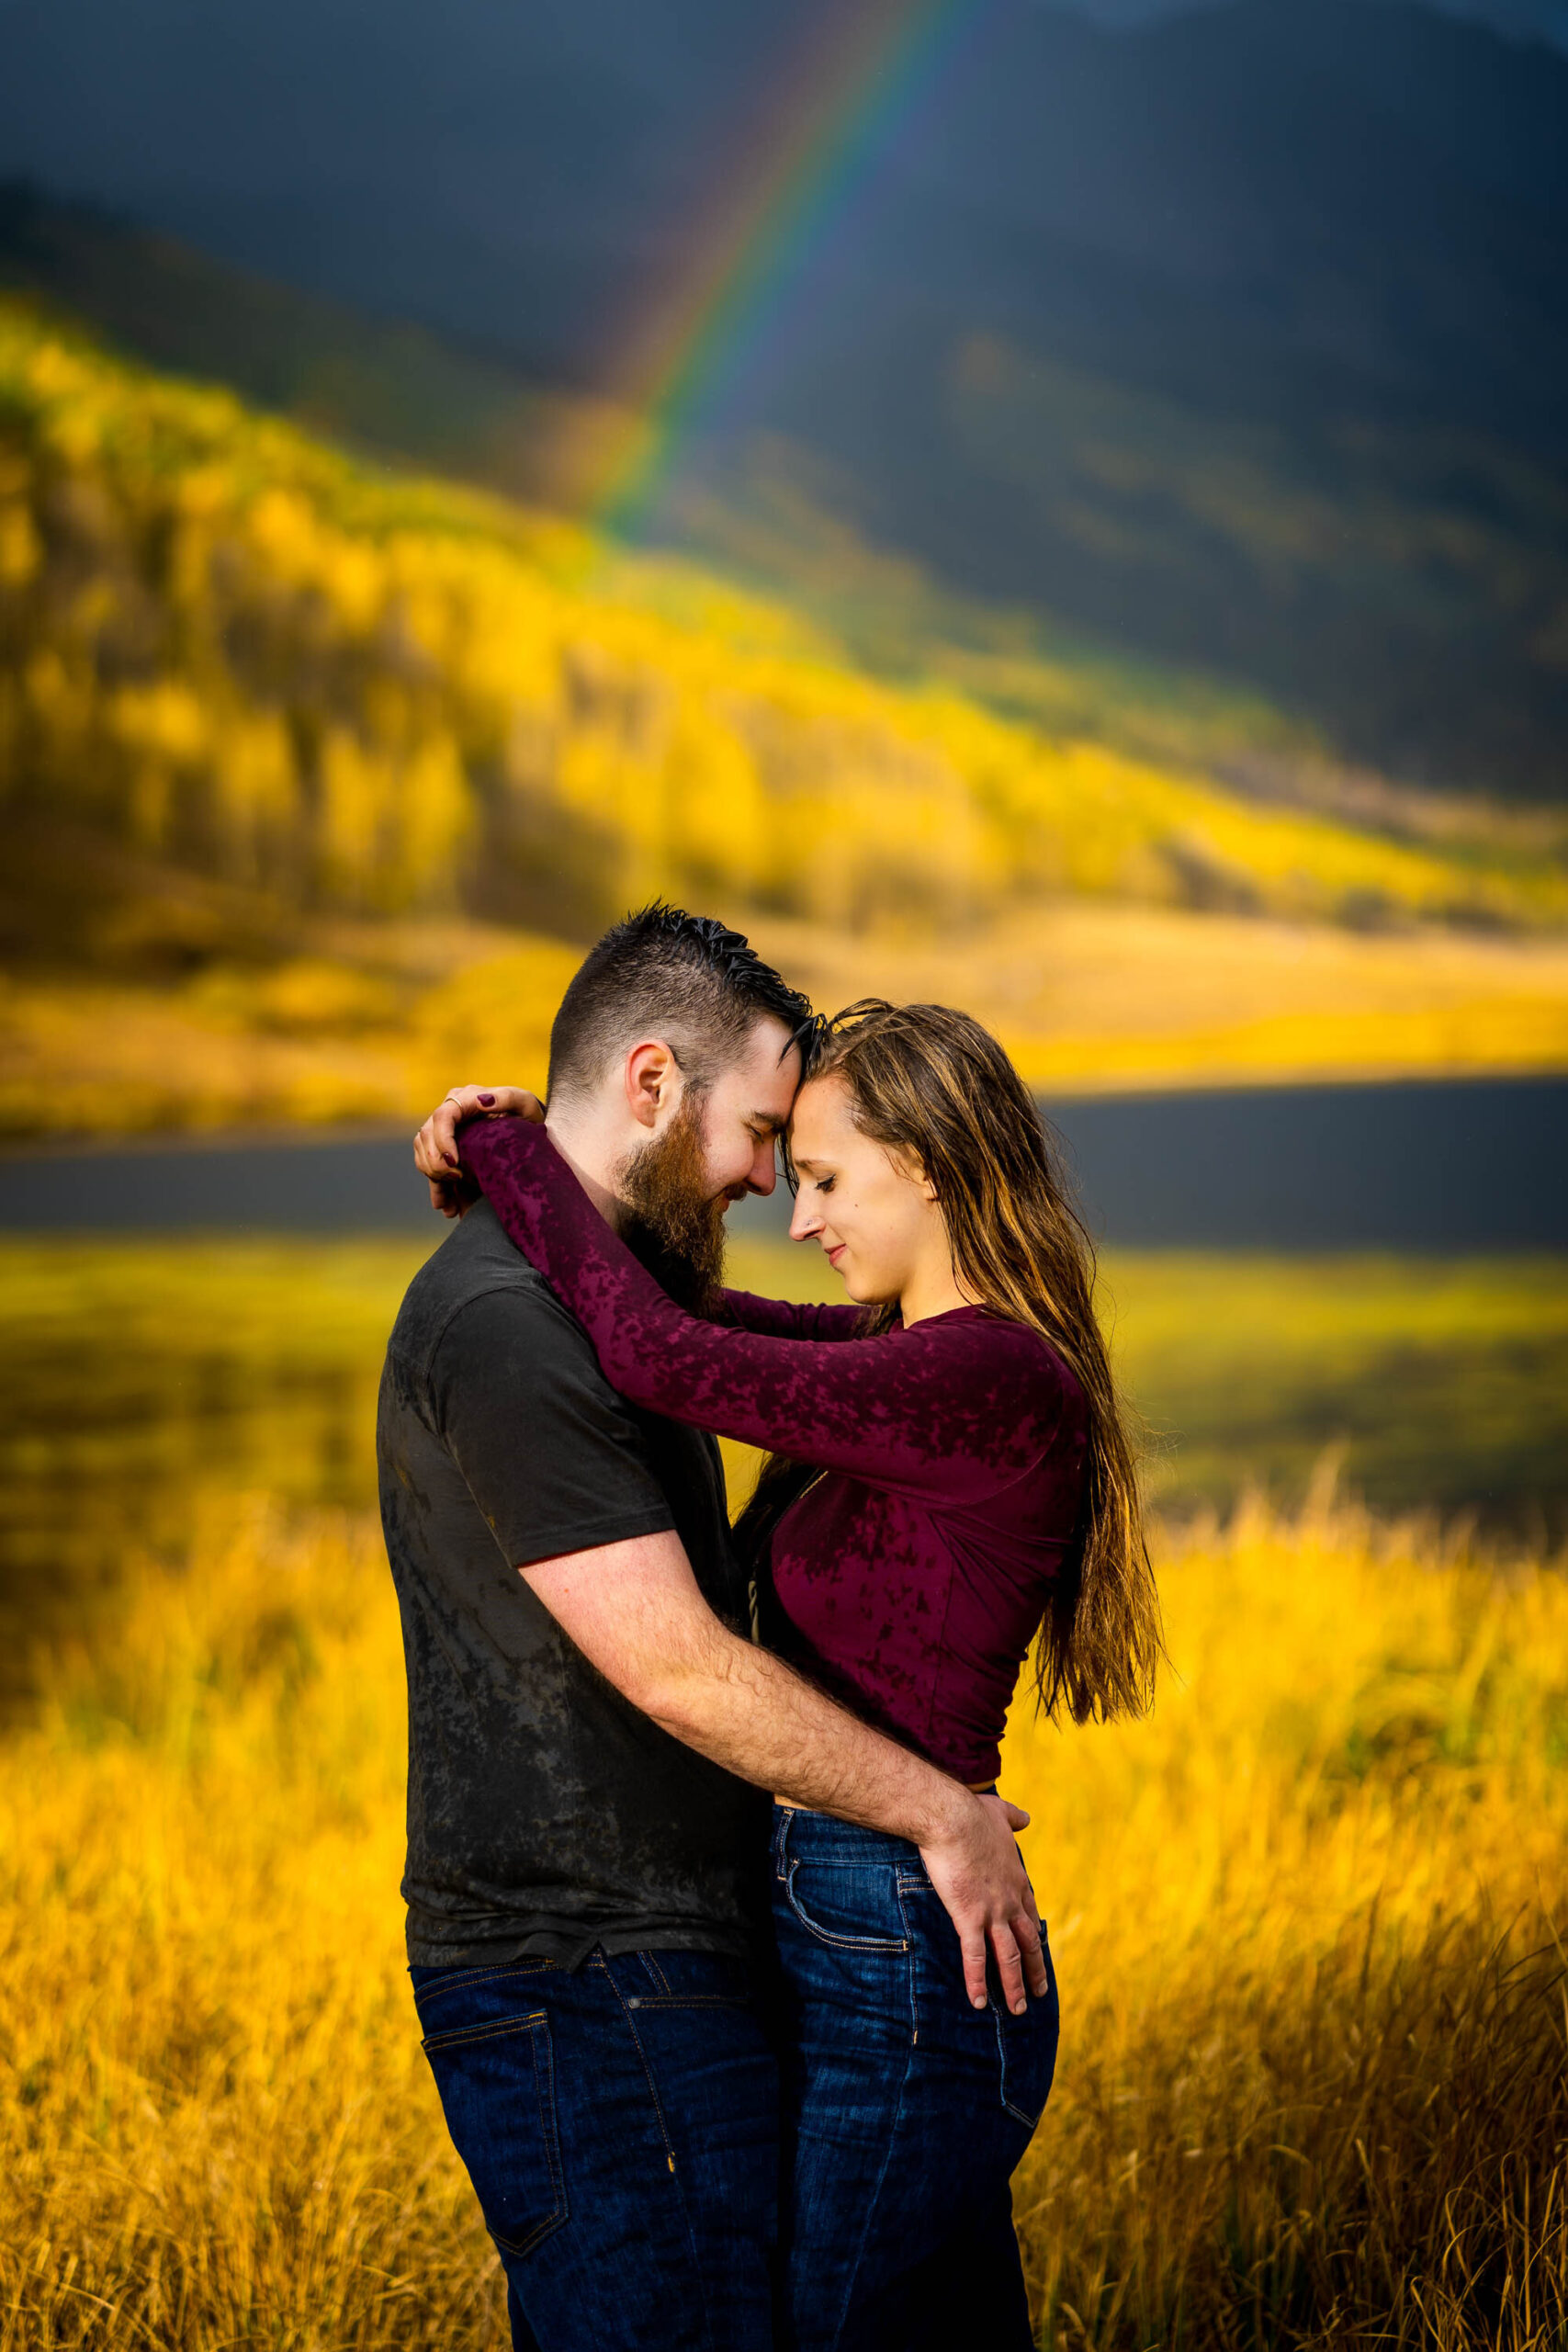 Engaged couple embraces for a portrait during a rainstorm with a double rainbow behind them arching over Piney Lake, Engagement Session, Engagement Photos, Engagement Photos Inspiration, Engagement Photography, Engagement Photographer, Fall Engagement Photos, Mountain Engagement Photos, Piney River Ranch engagement photos, Vail engagement session, Vail engagement photos, Vail engagement photography, Vail engagement photographer, Vail engagement inspiration, Colorado engagement session, Colorado engagement photos, Colorado engagement photography, Colorado engagement photographer, Colorado engagement inspiration